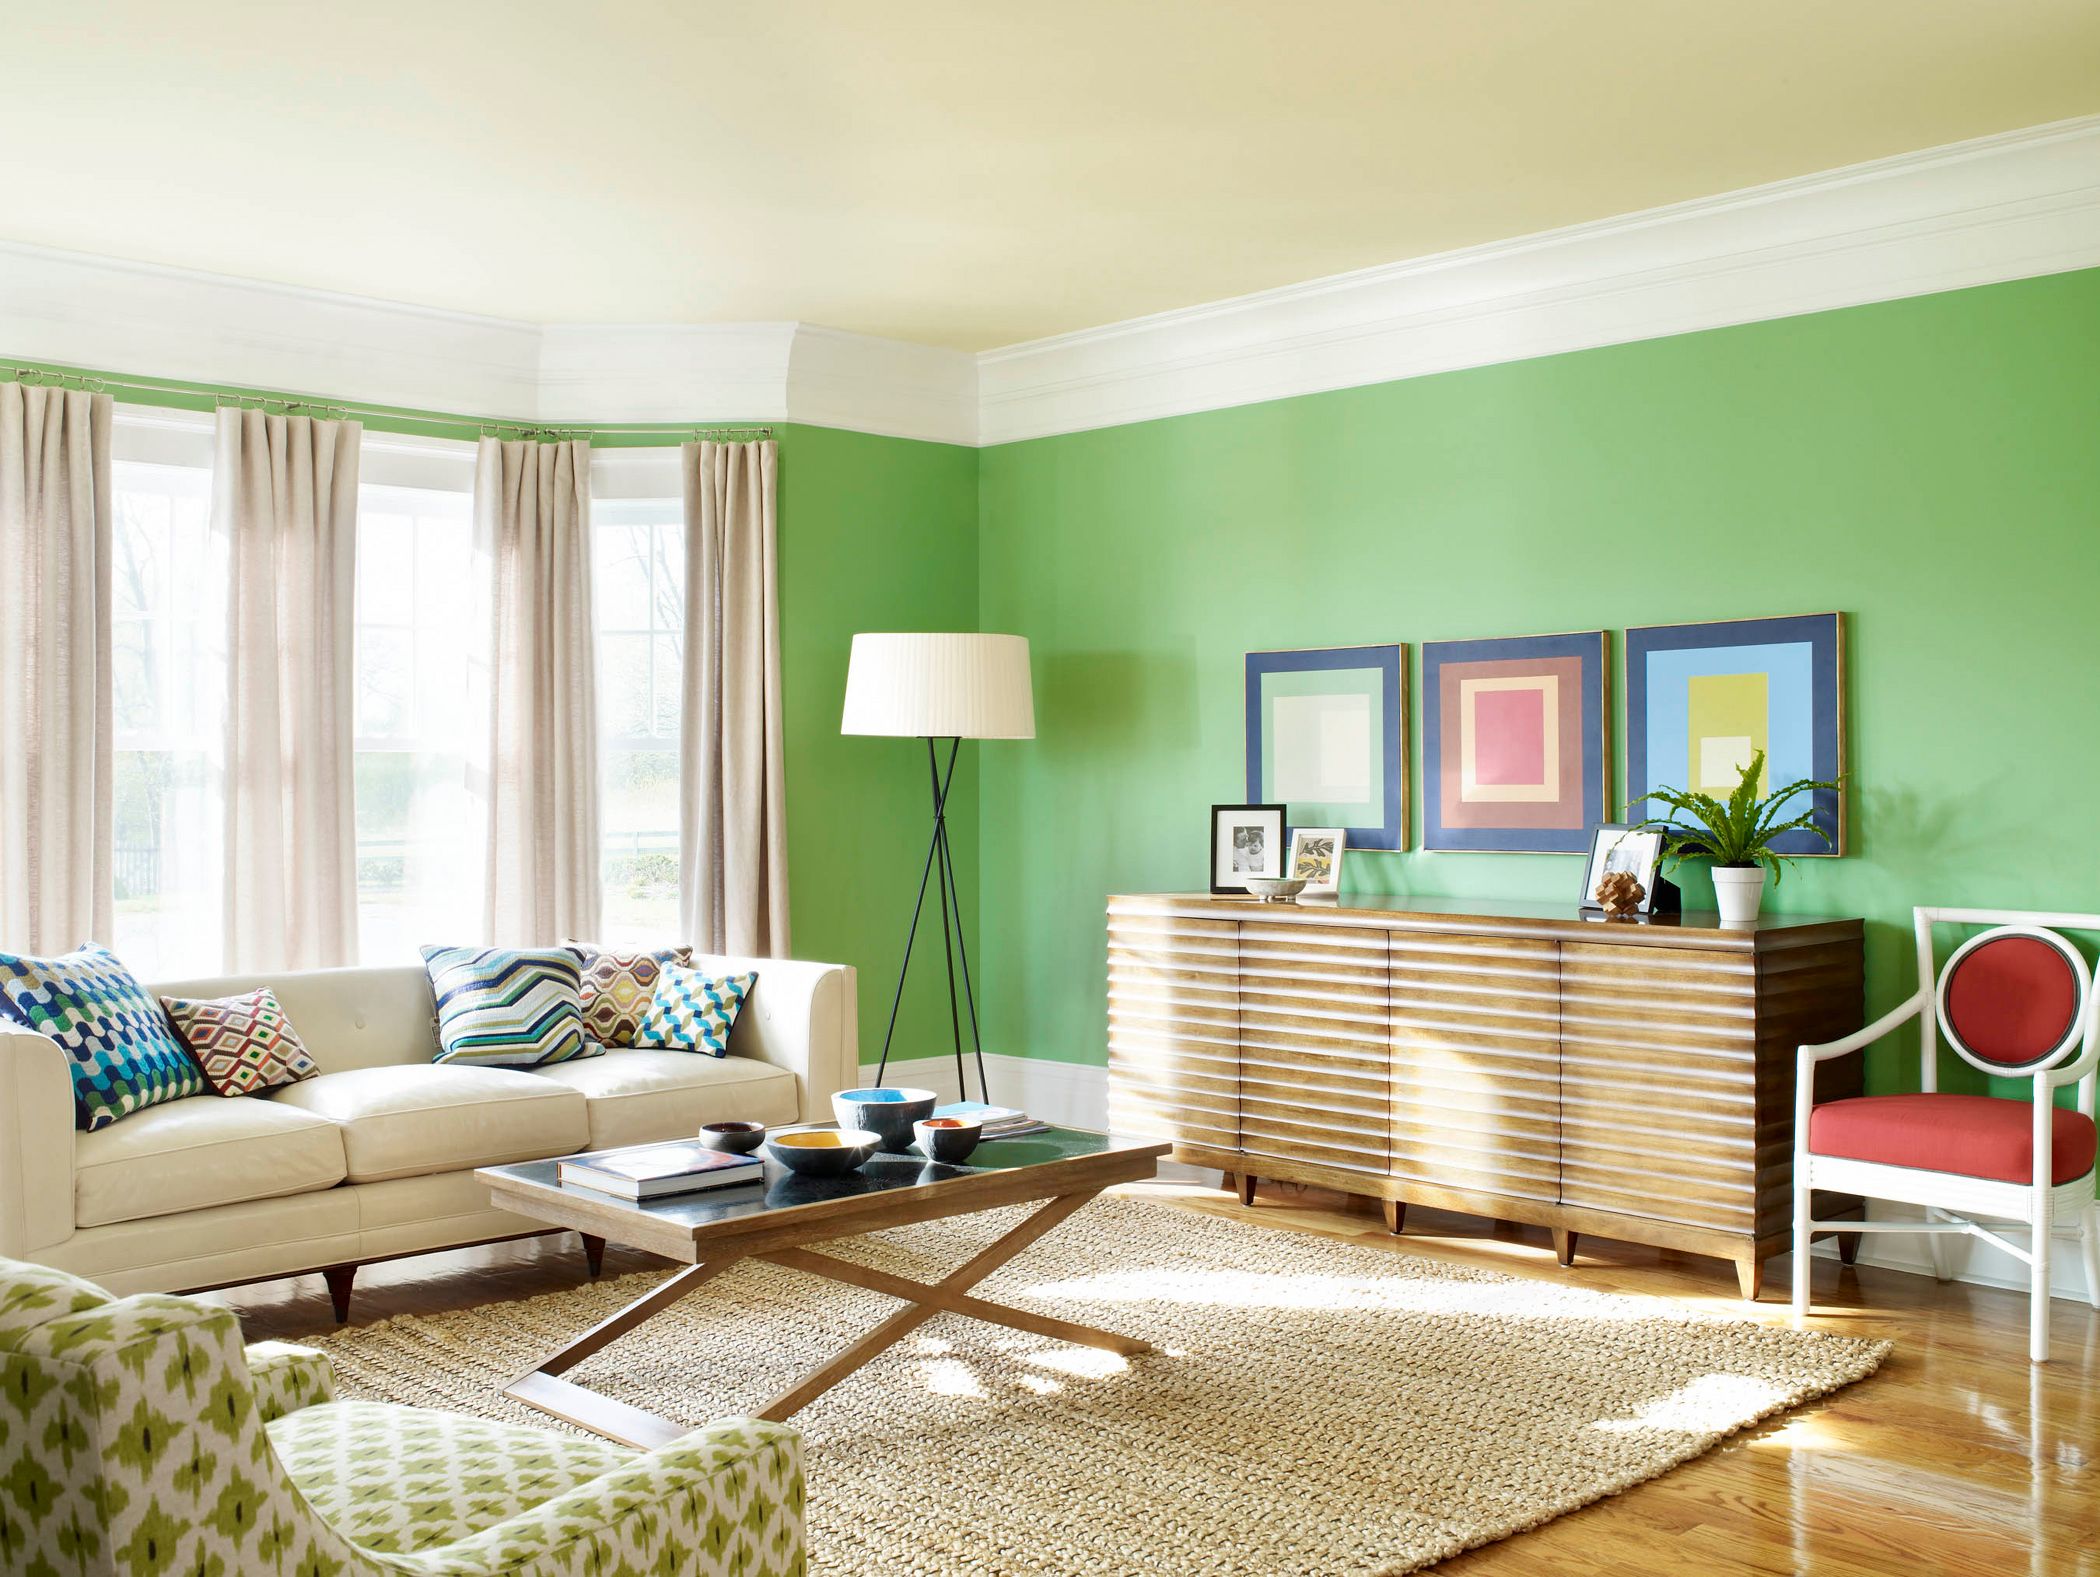 Decorating Ideas For Living Room With Green Wall